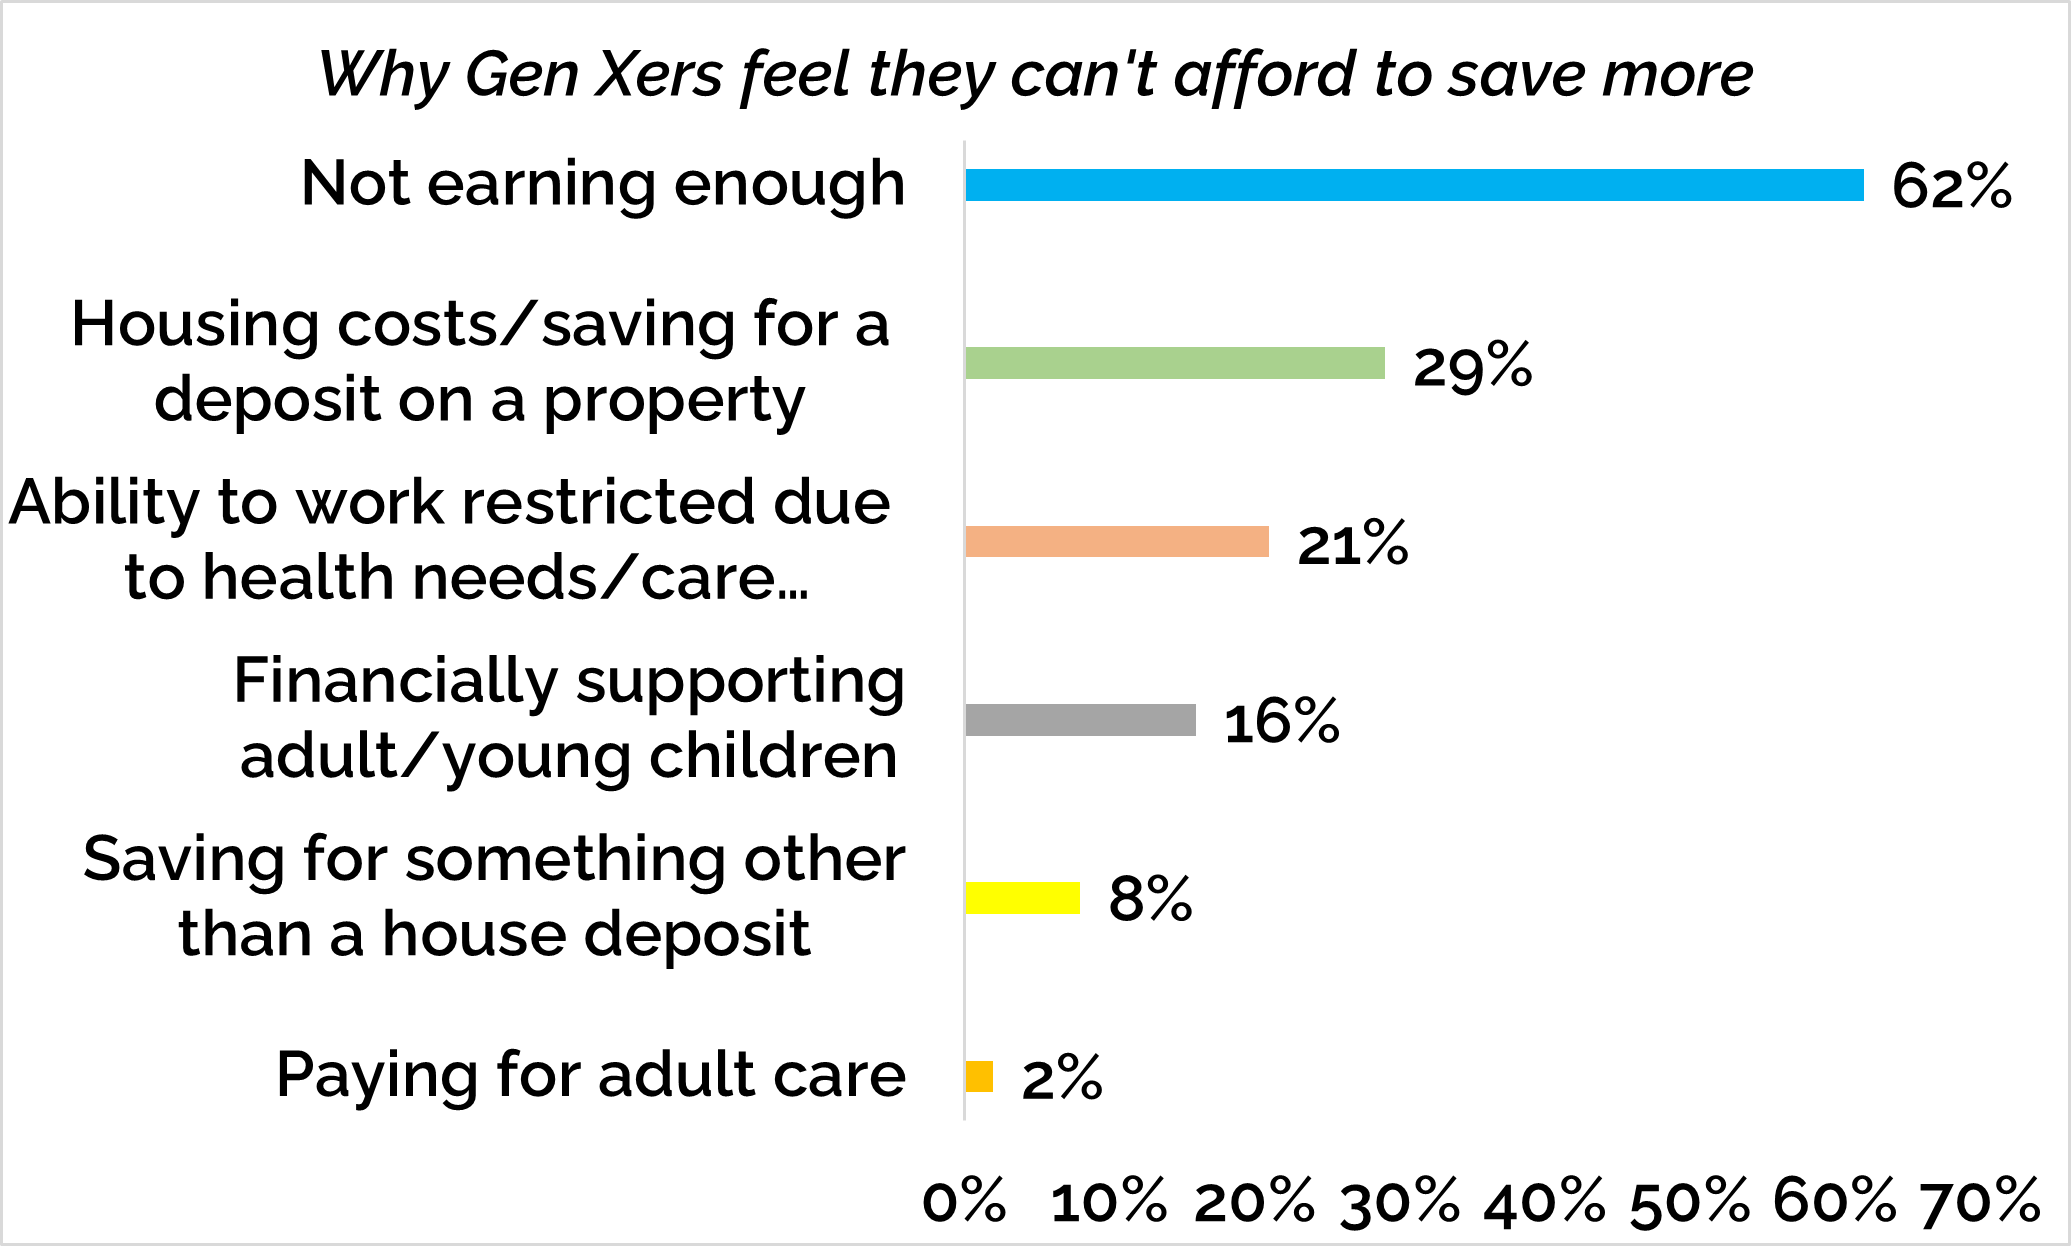 Graph: why Gen Xers feel they can't afford to save more. Not earning enough: 62%; housing costs or saving for a deposit on a property: 29%; ability to work restricted due to health needs or care: 21%; financially supporting adult or young children: 16%; saving for something other than a house deposit: 8%; paying for adult care: 2%